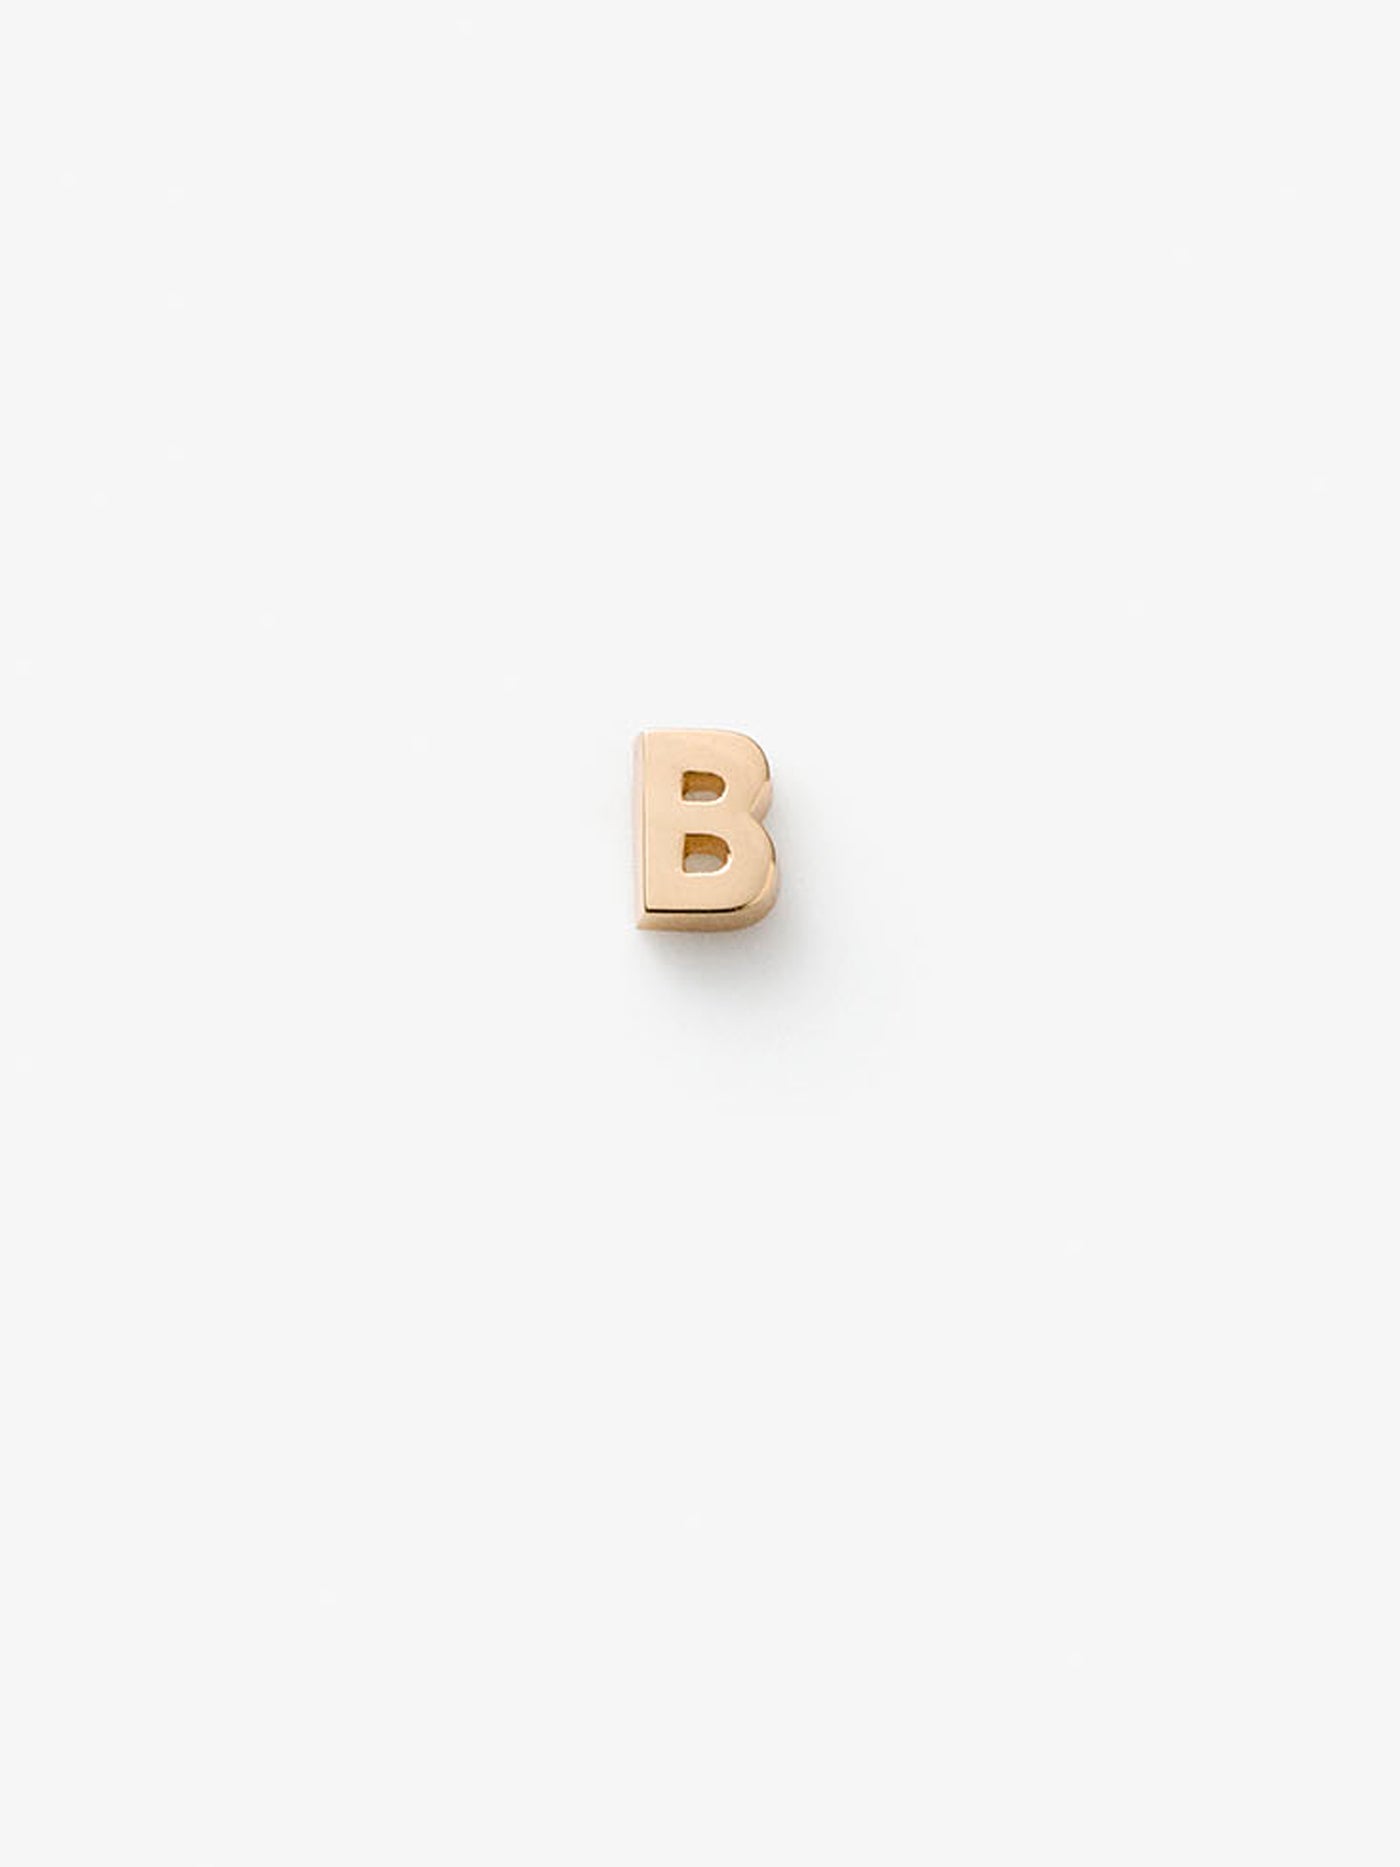 One Letter B in 18k Gold